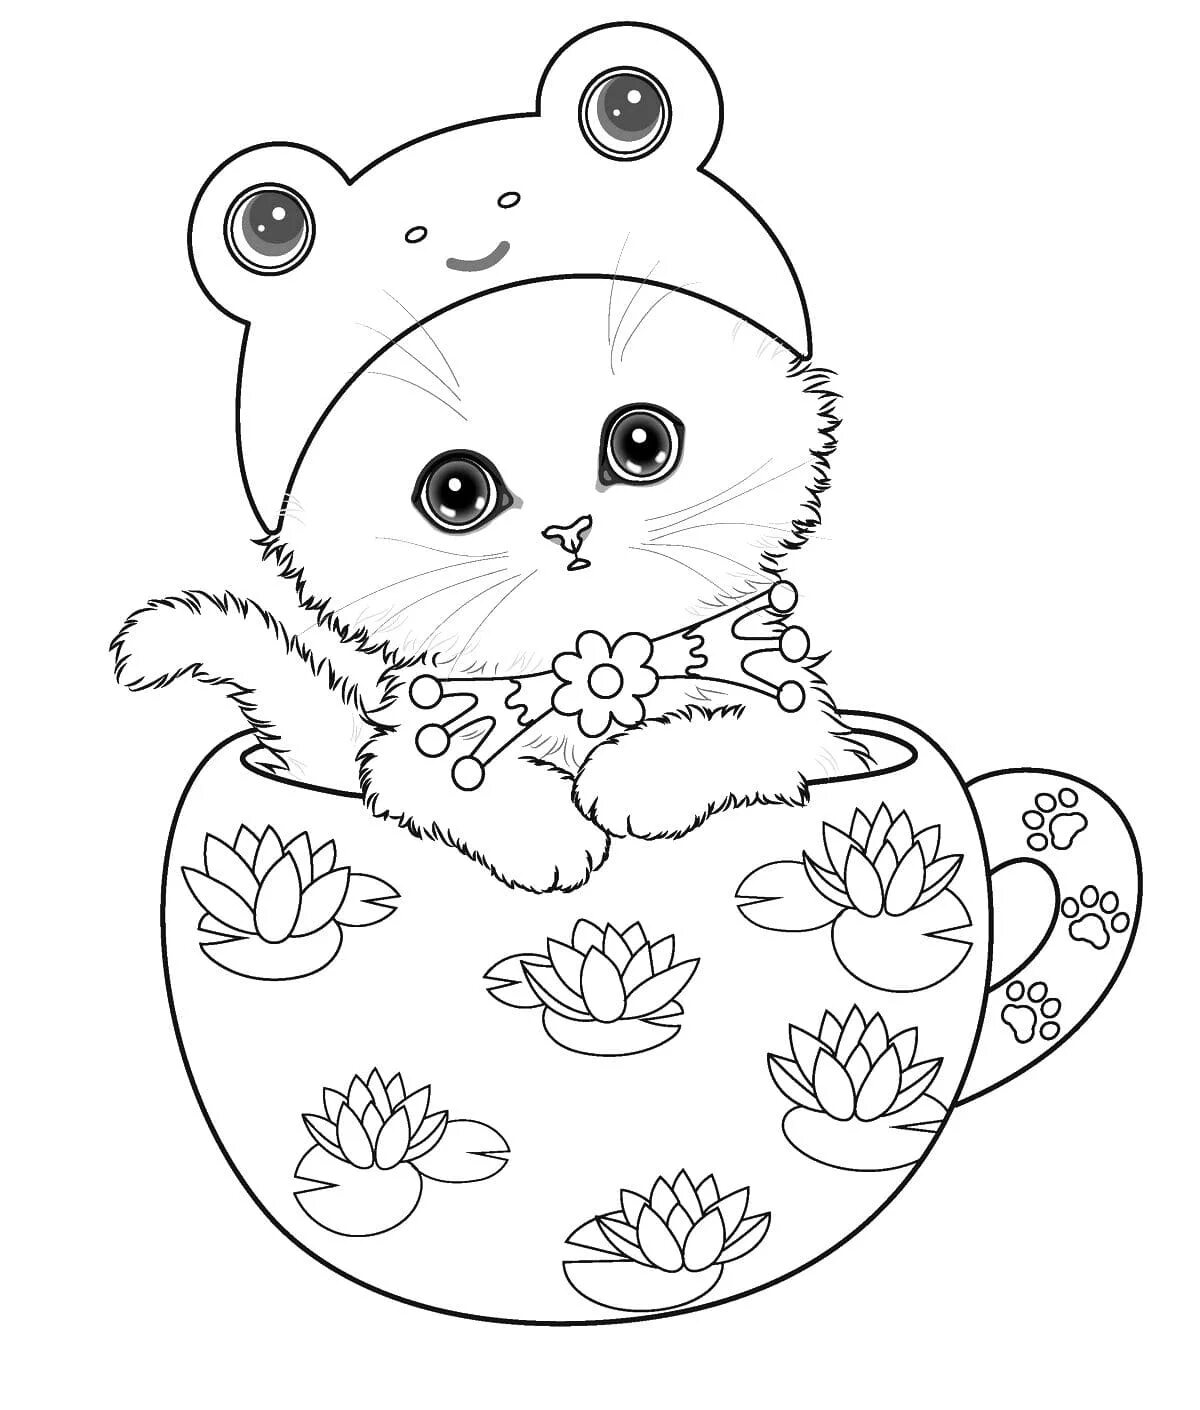 Adorable and quirky cat coloring pages for kids